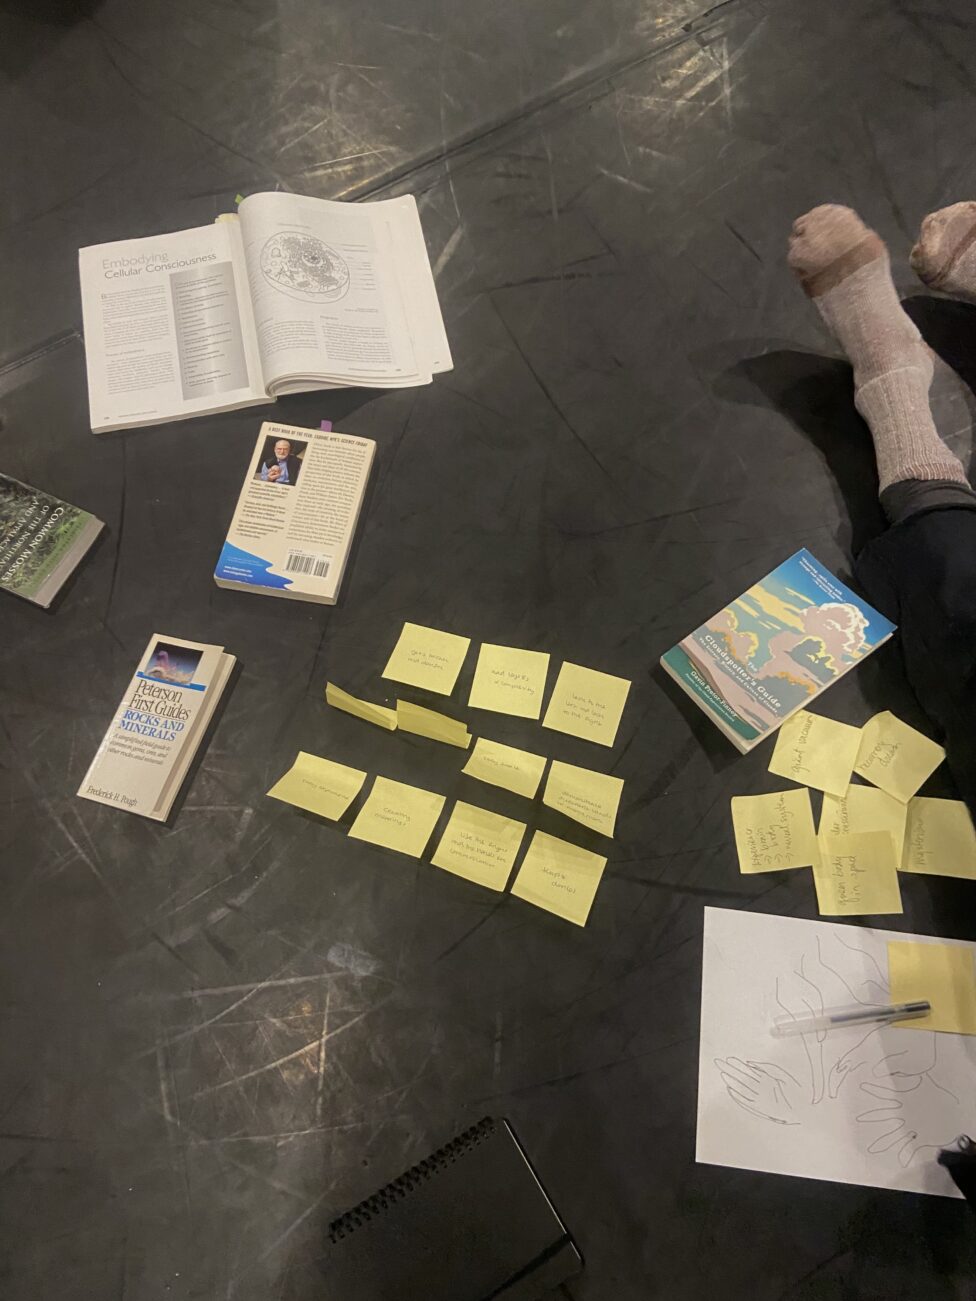 Three neat rows of post-its surrounded by books, drawings, notebooks and socked feet. Image courtesy of the artist.